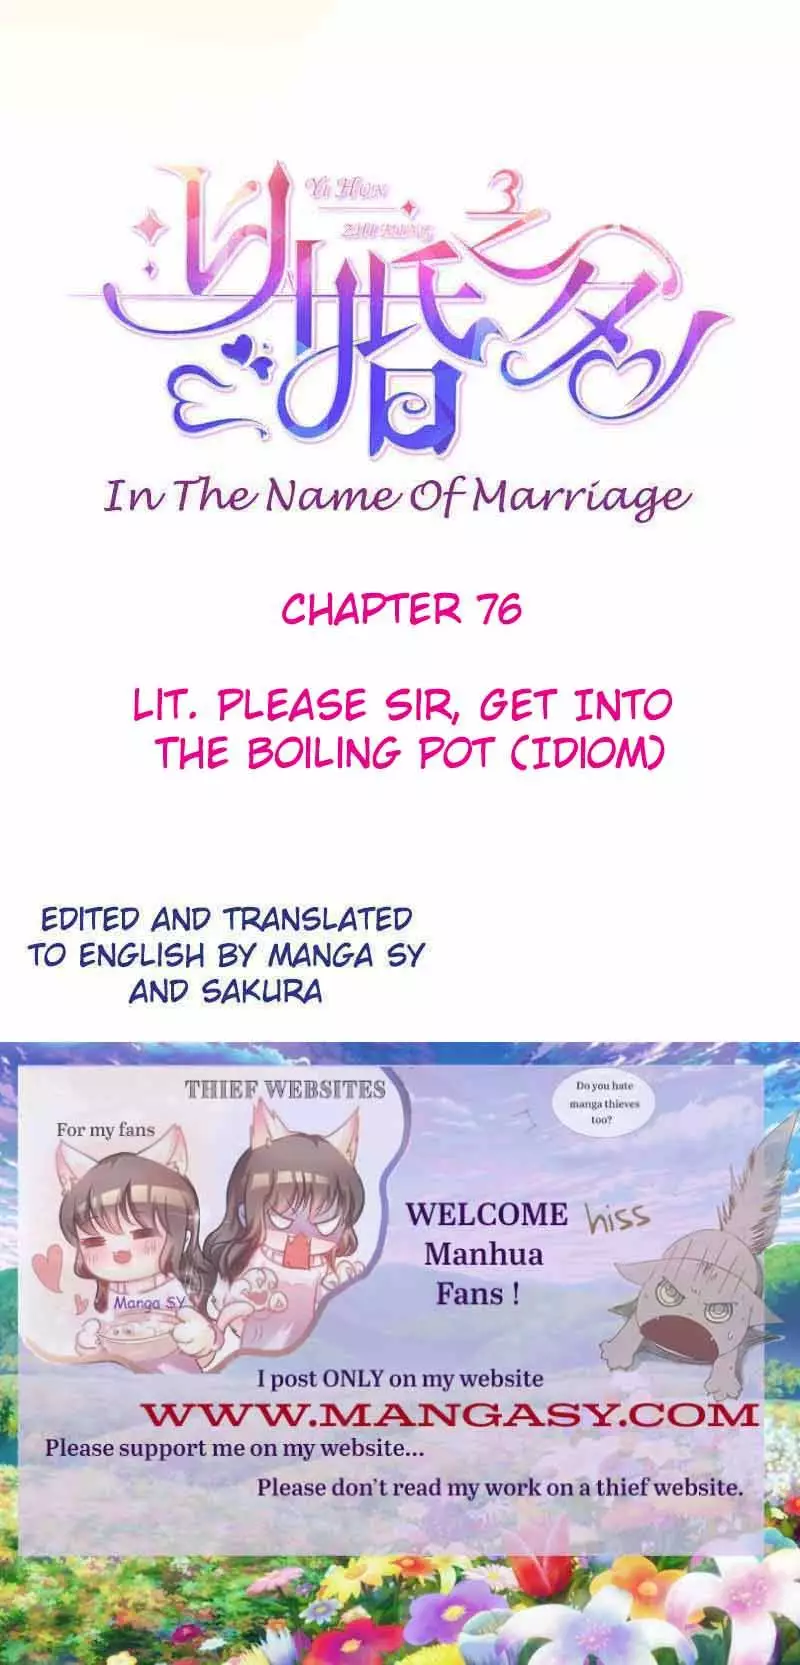 In The Name Of Marriage - 76 page 1-d9b99e25